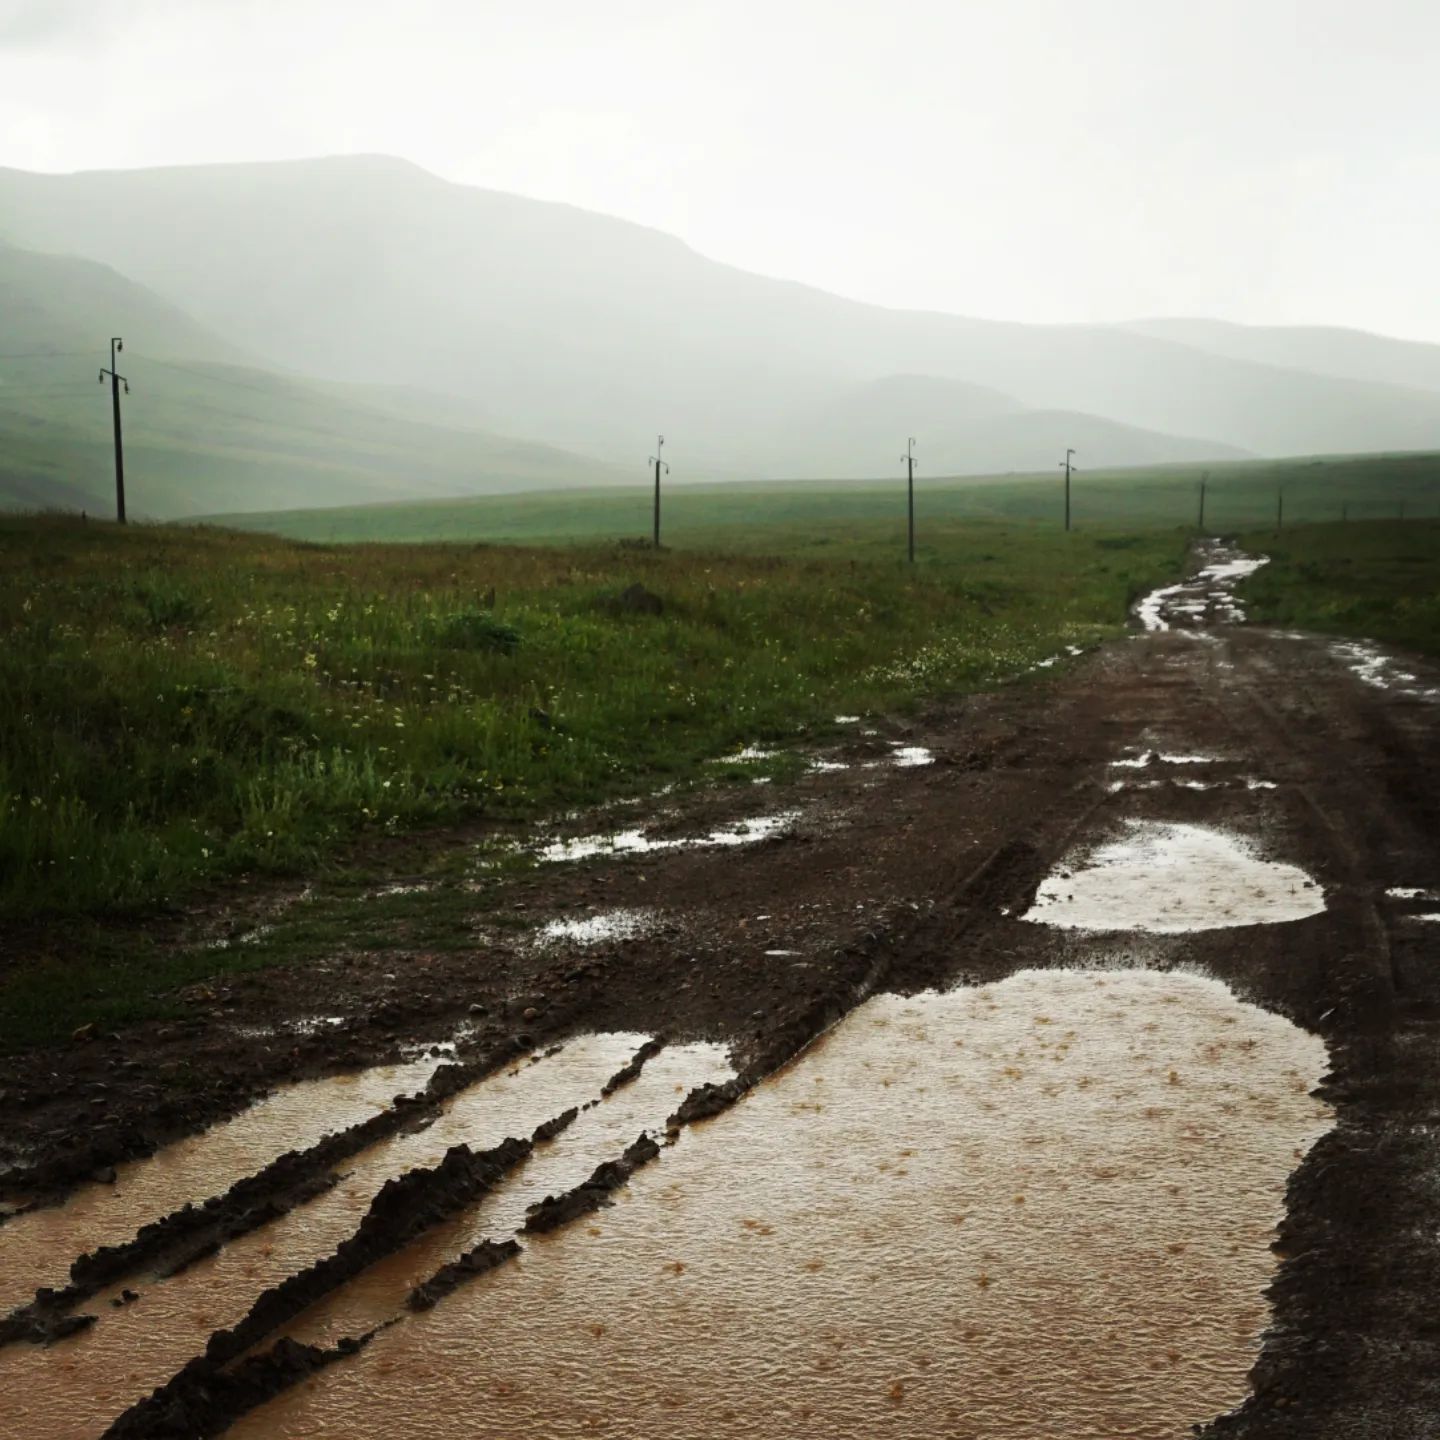 A photograph of a mud road receding into foggy distance with lots of rainy puddles.